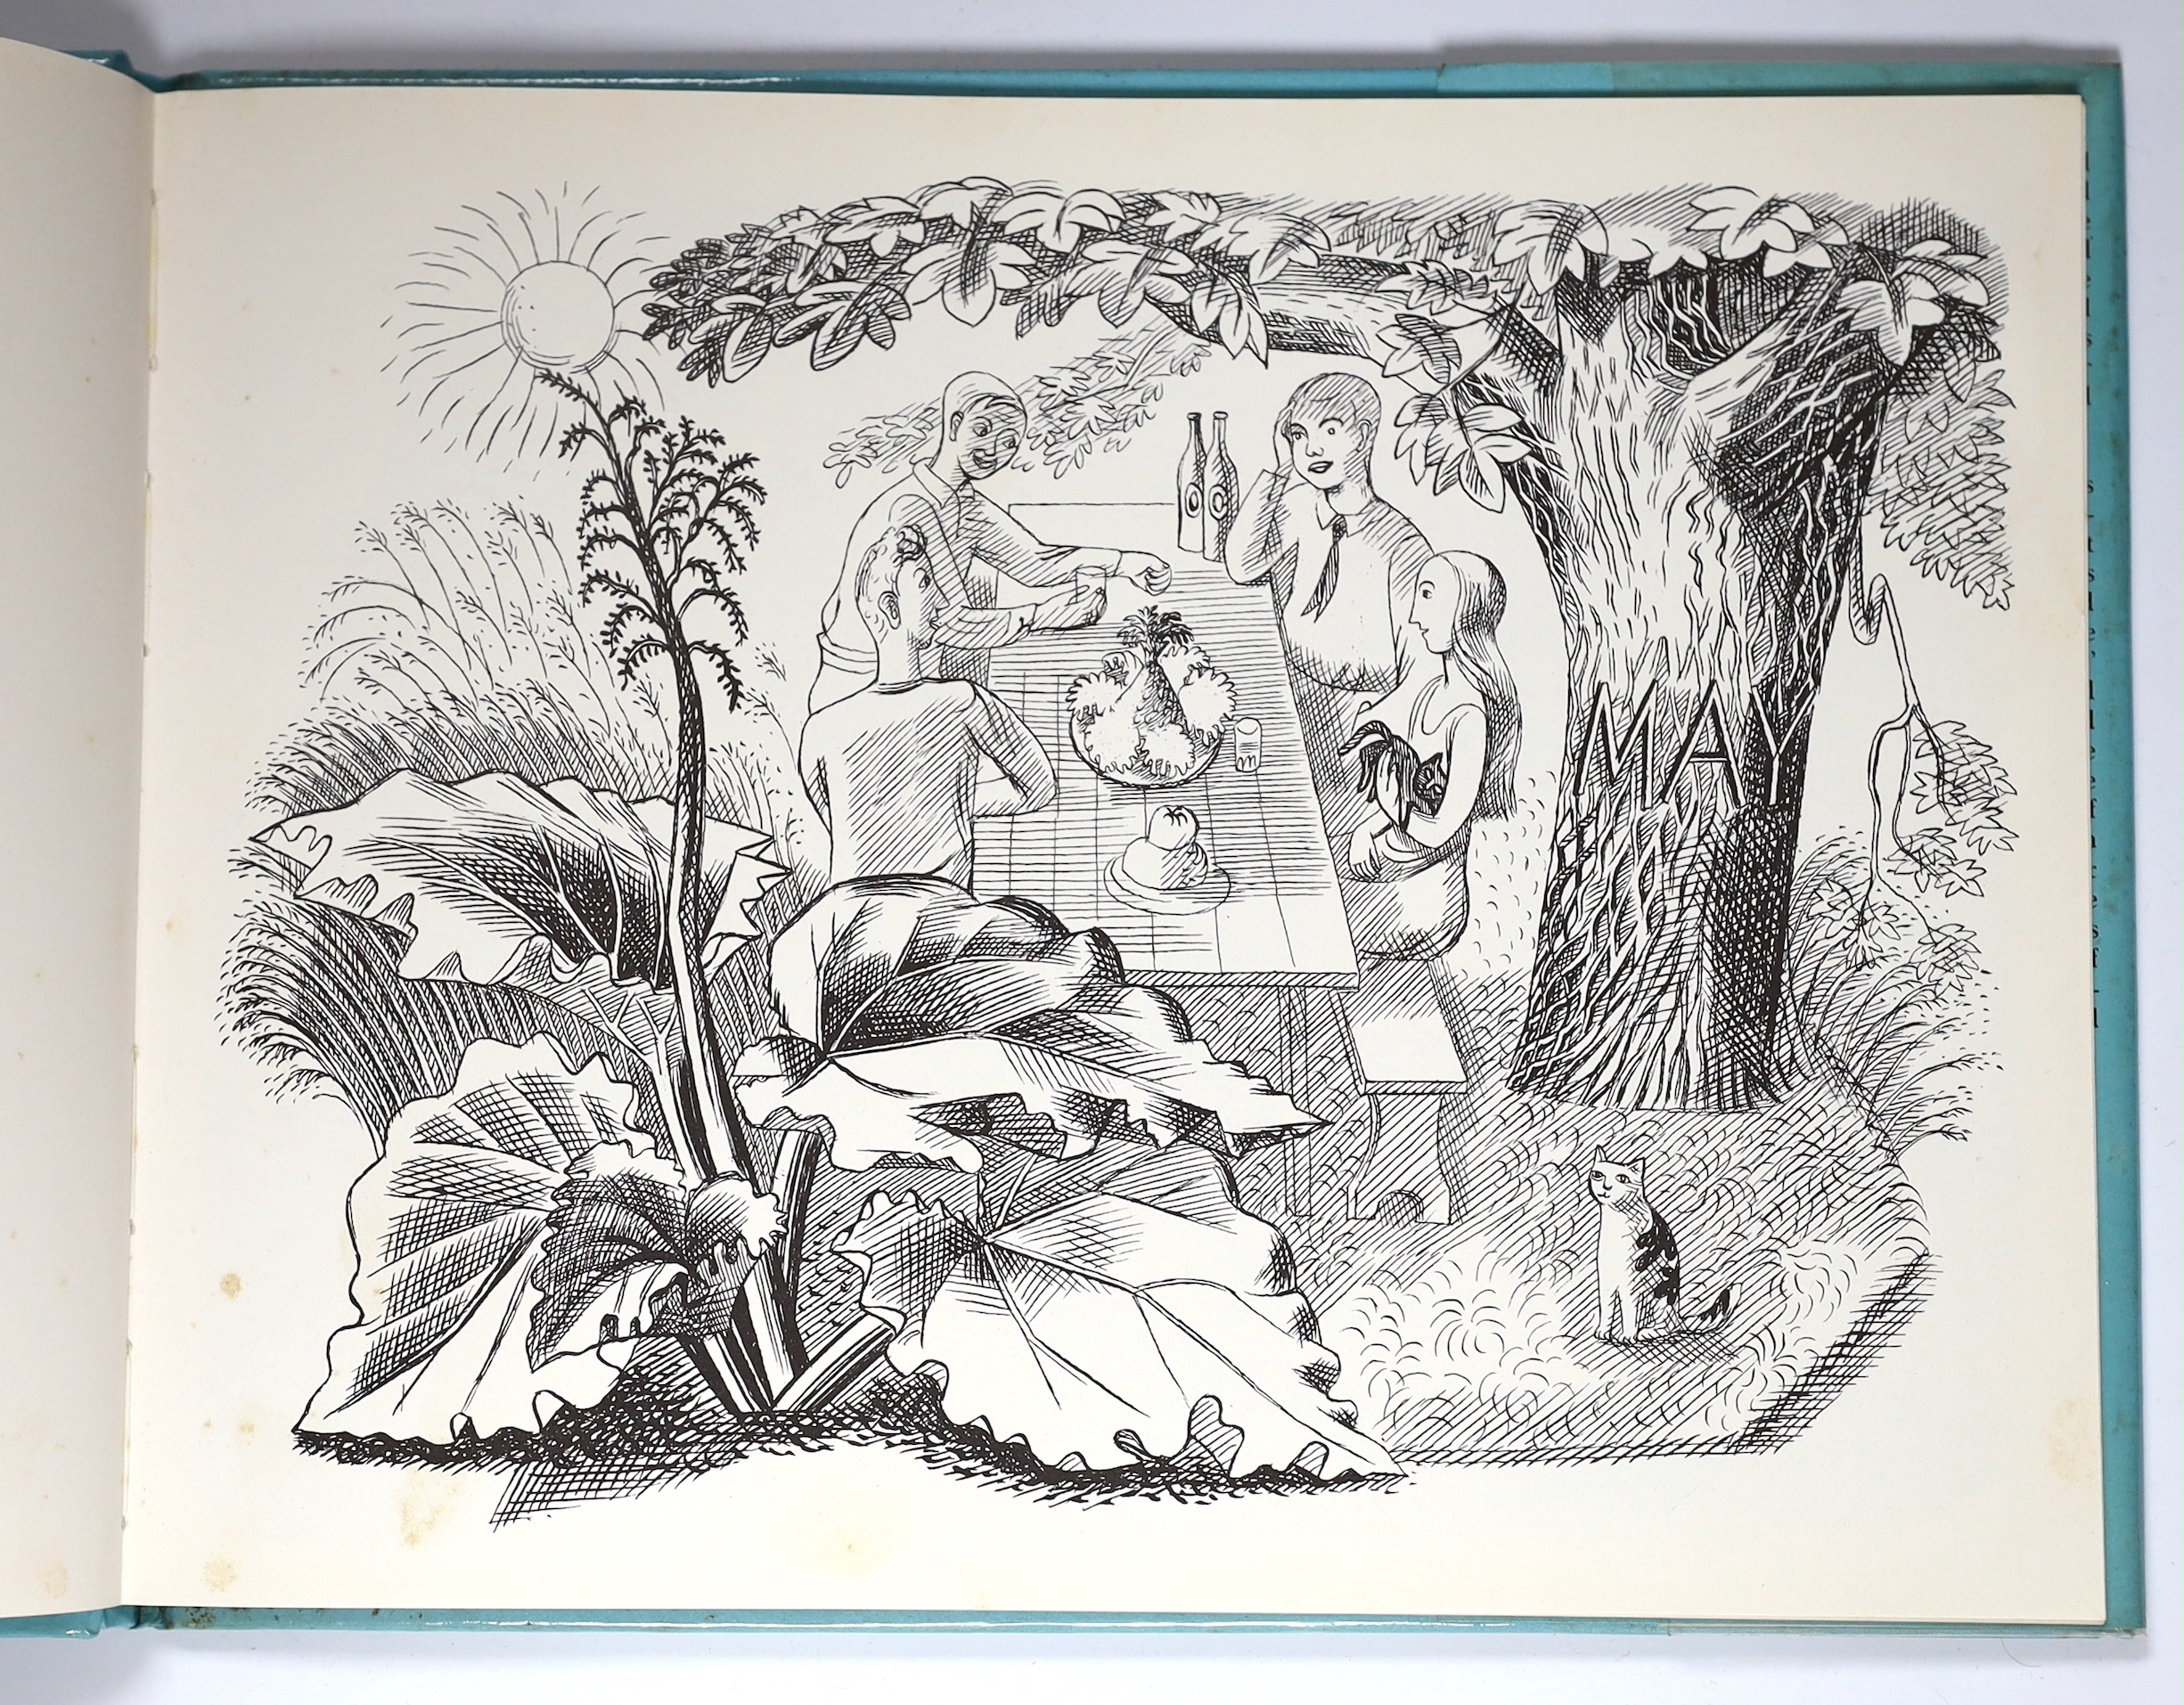 Bawden, Edward (illustrator) - Hennell, Thomas - Lady Filmy Fern, or The Voyage of the Window Box, signed on title by illustrator, original pictorial boards, with d/j, Hamish Hamilton, London, 1980, together with an unda